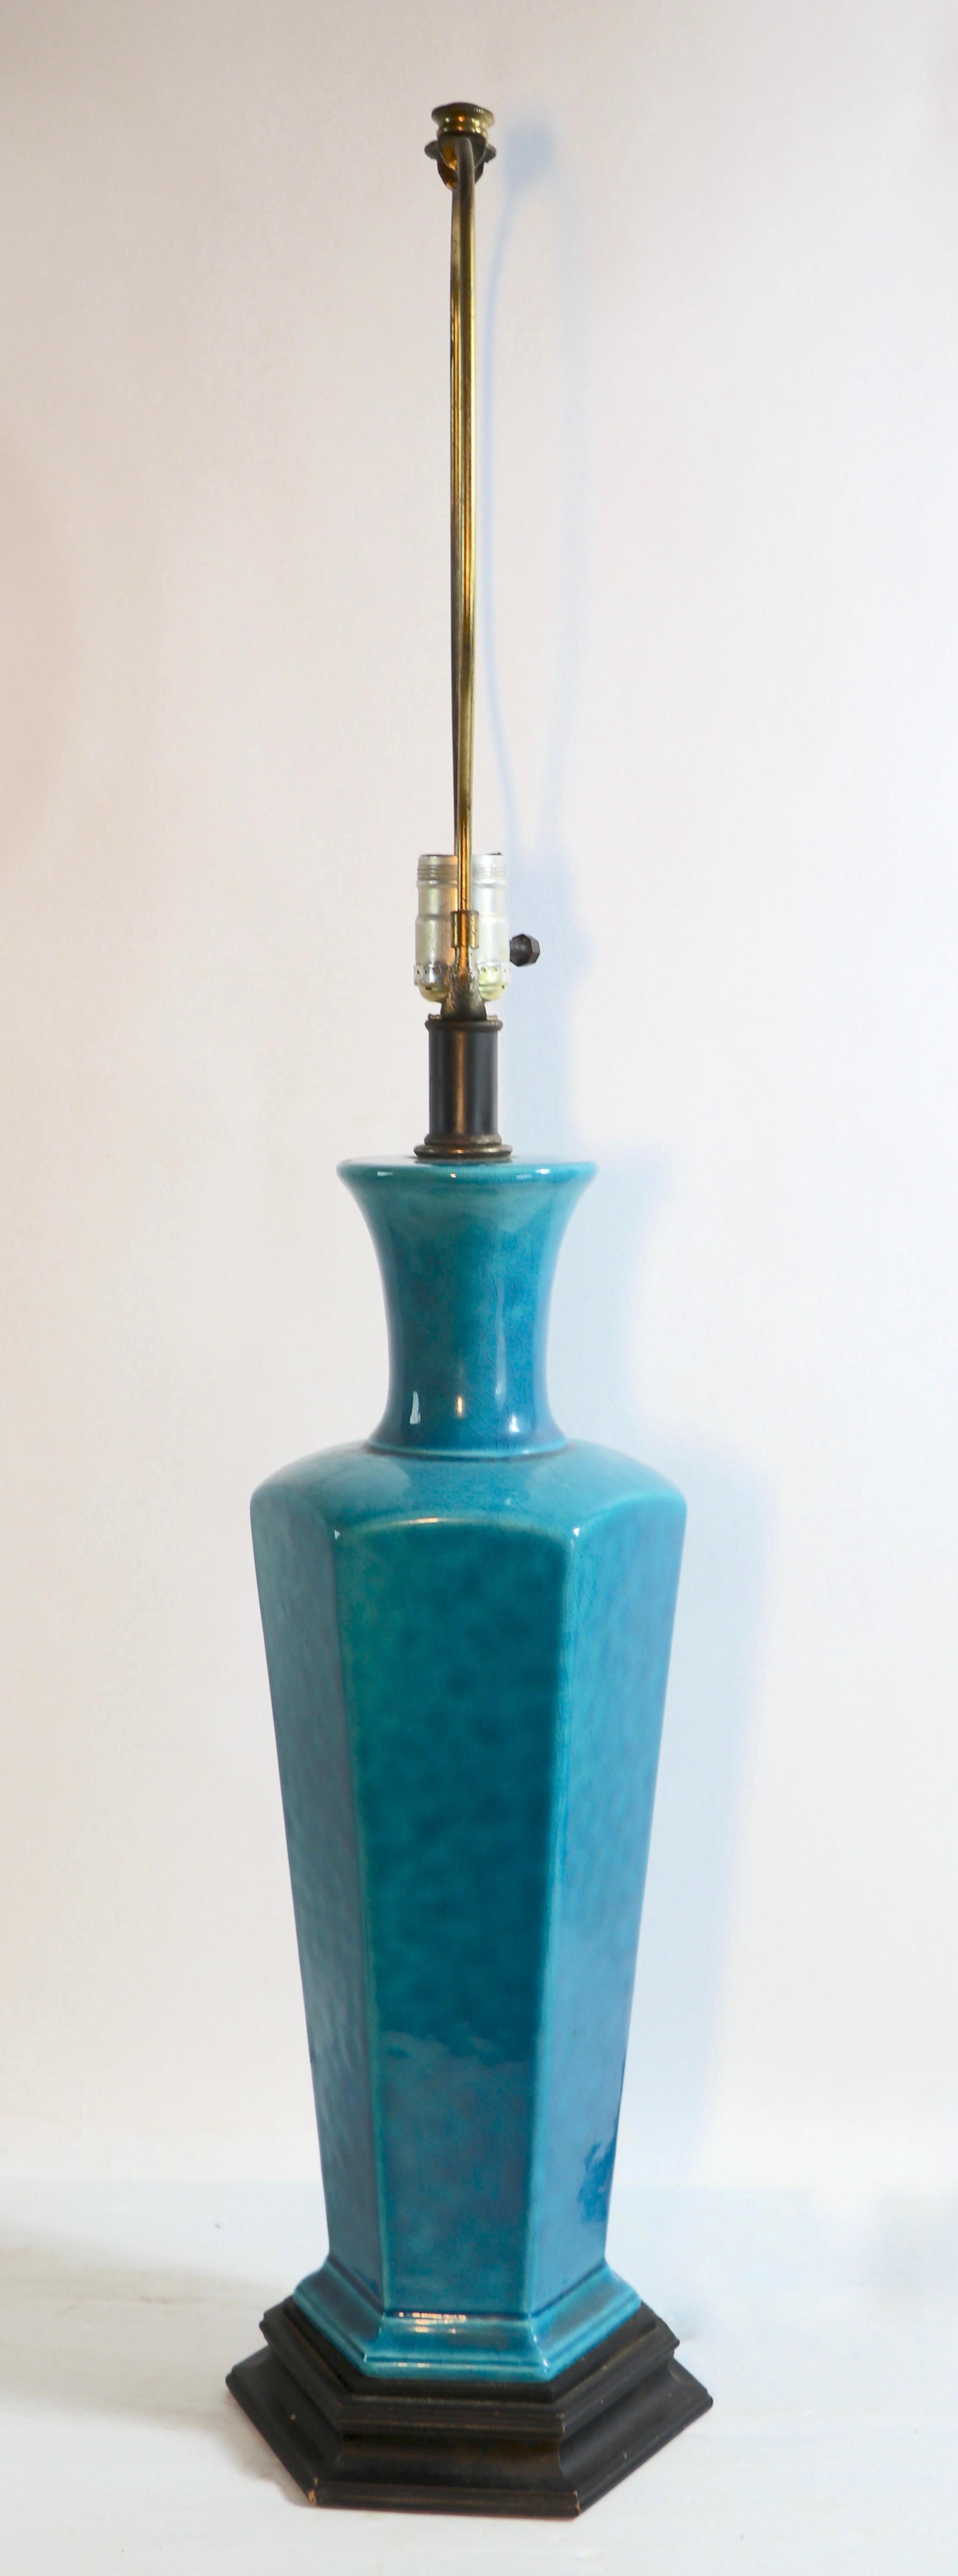 Mid-Century Modern Asia Modern Chinese Style Table Lamp in Blue Craquelure Glaze Finish